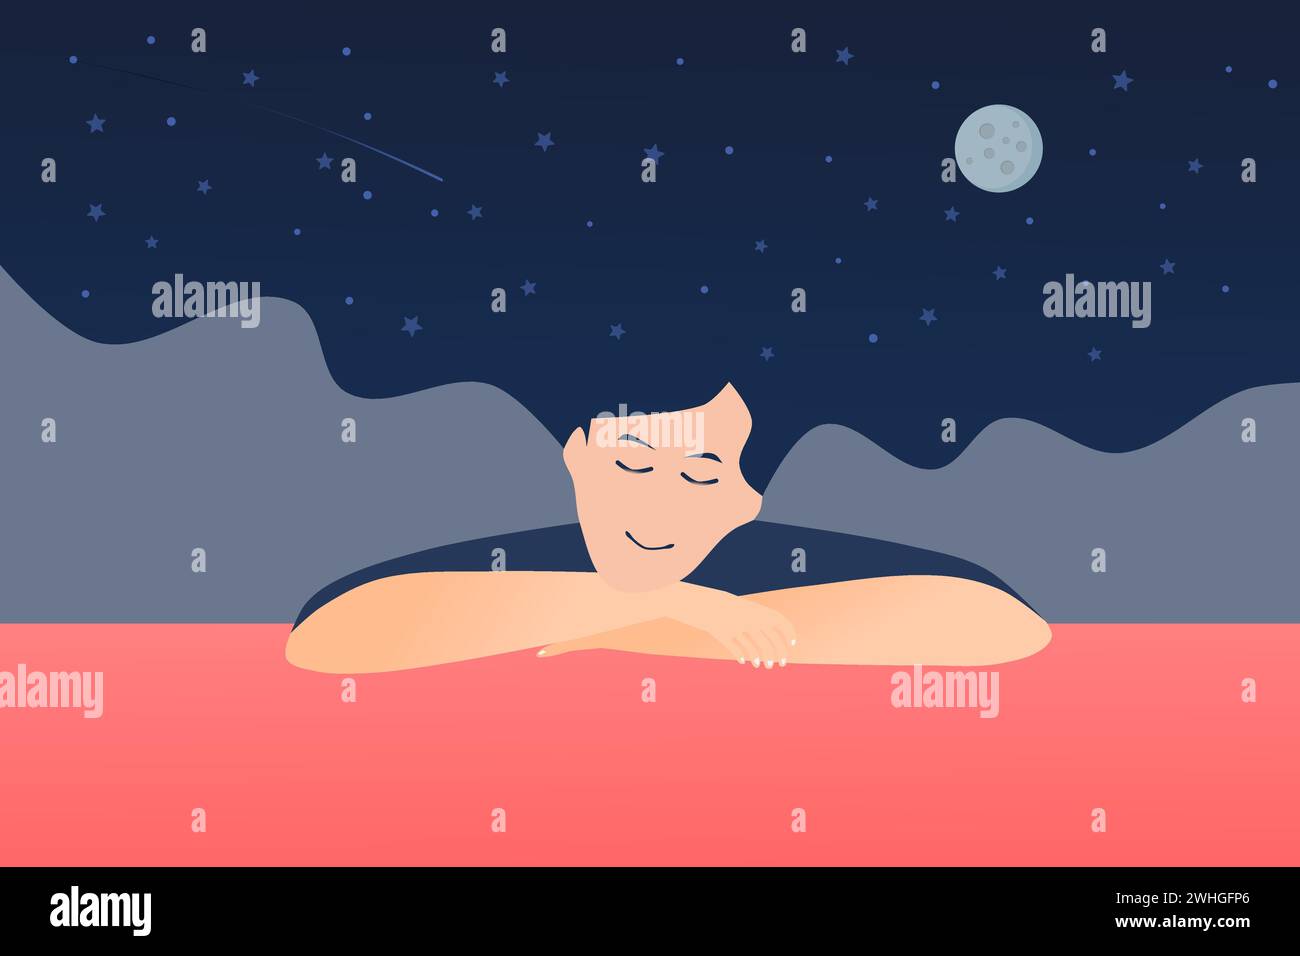 Young people with closed eyes, sleeping, and night starry sky. Dreaming or daydreaming. Vector illustration. Stock Vector